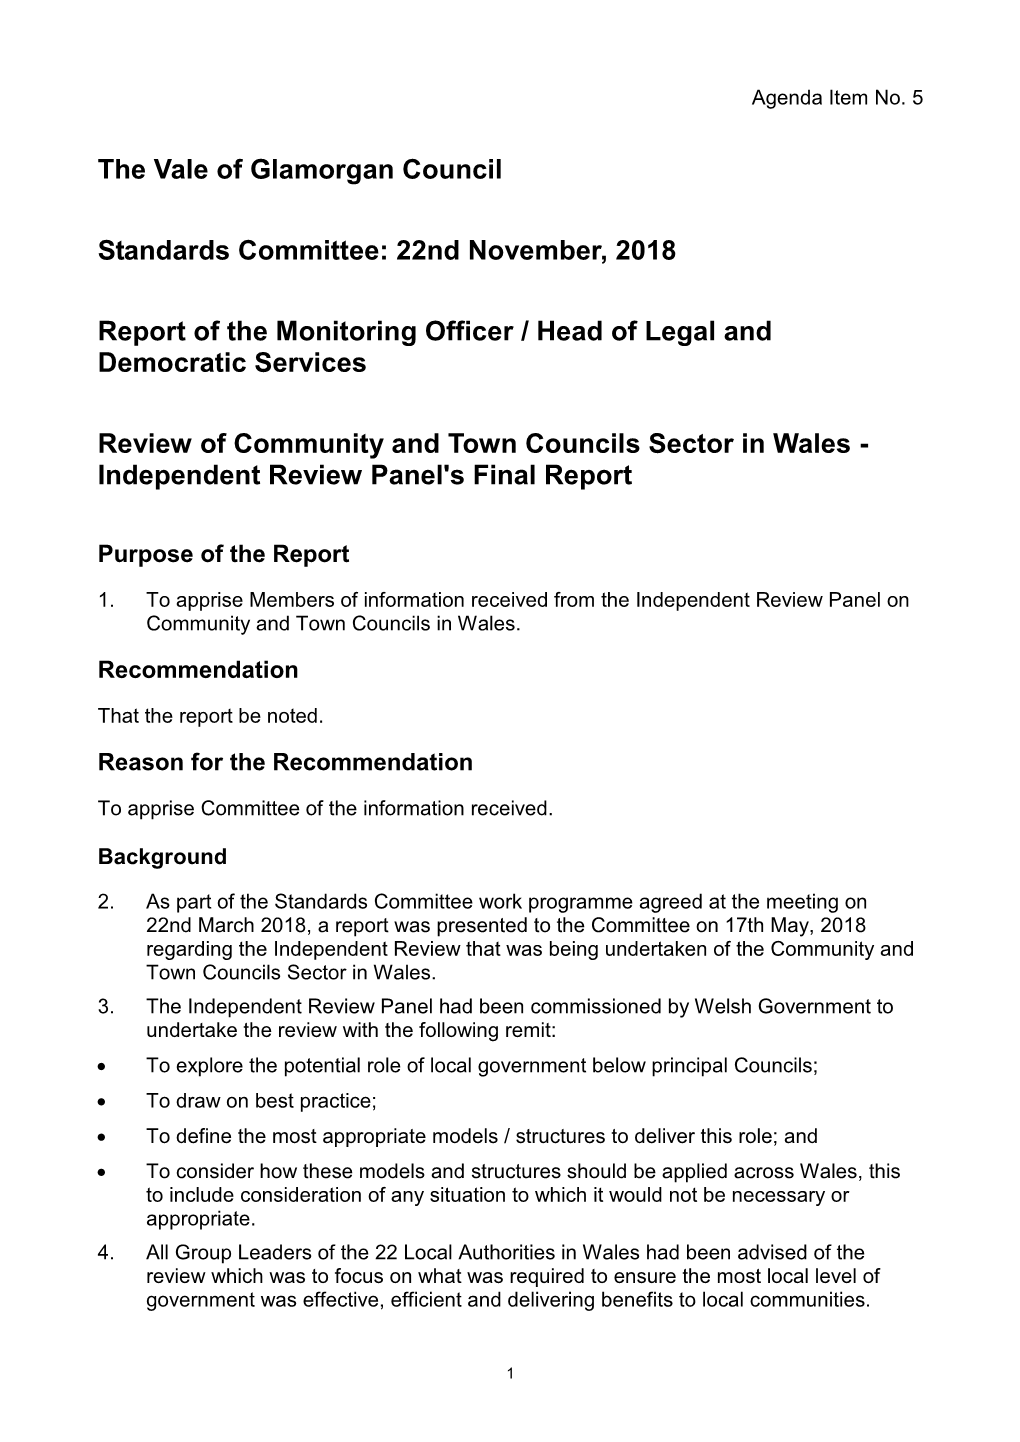 Review of Community and Town Councils Sector in Wales Report